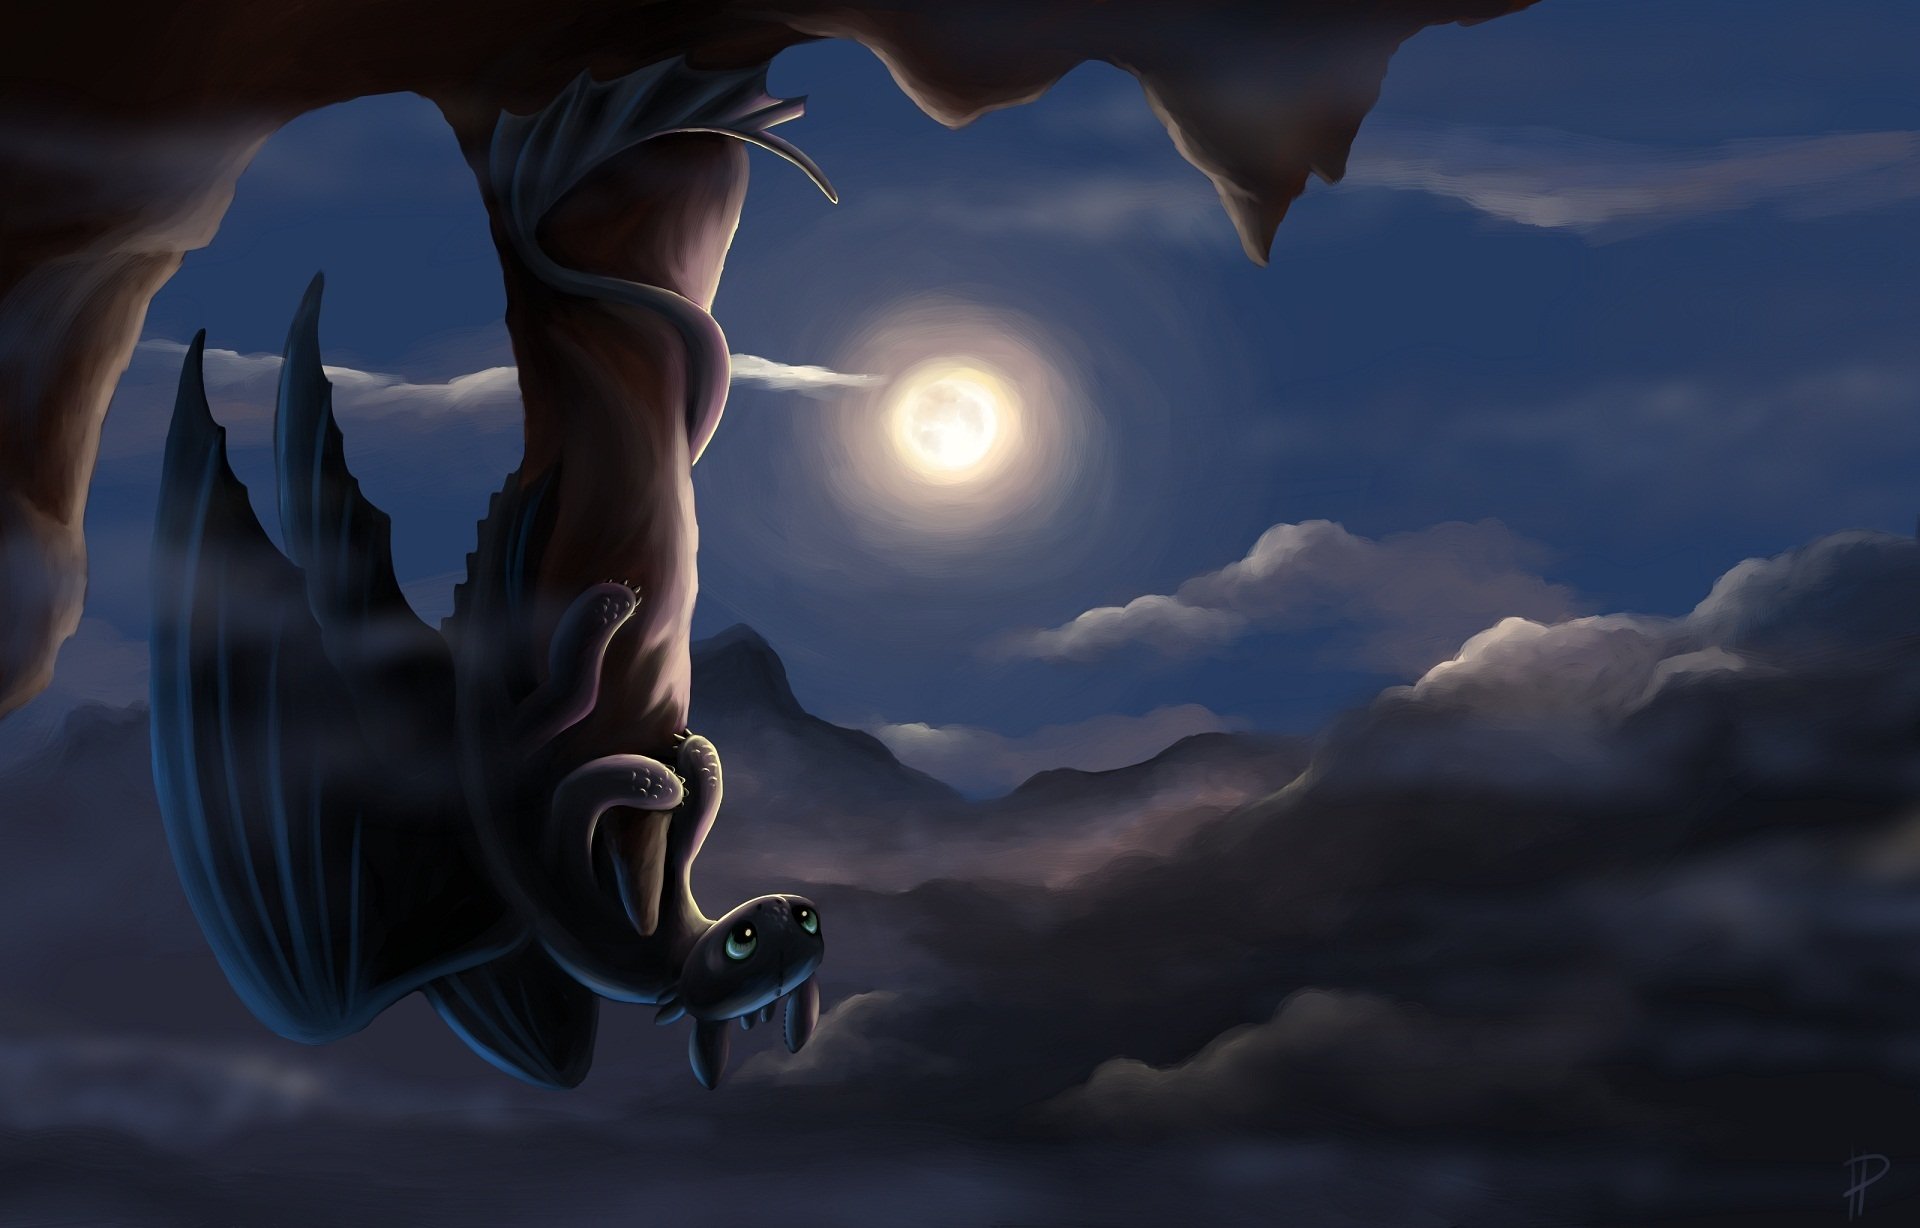 Picture How to Train Your Dragon Dragons Cartoons Moon night time